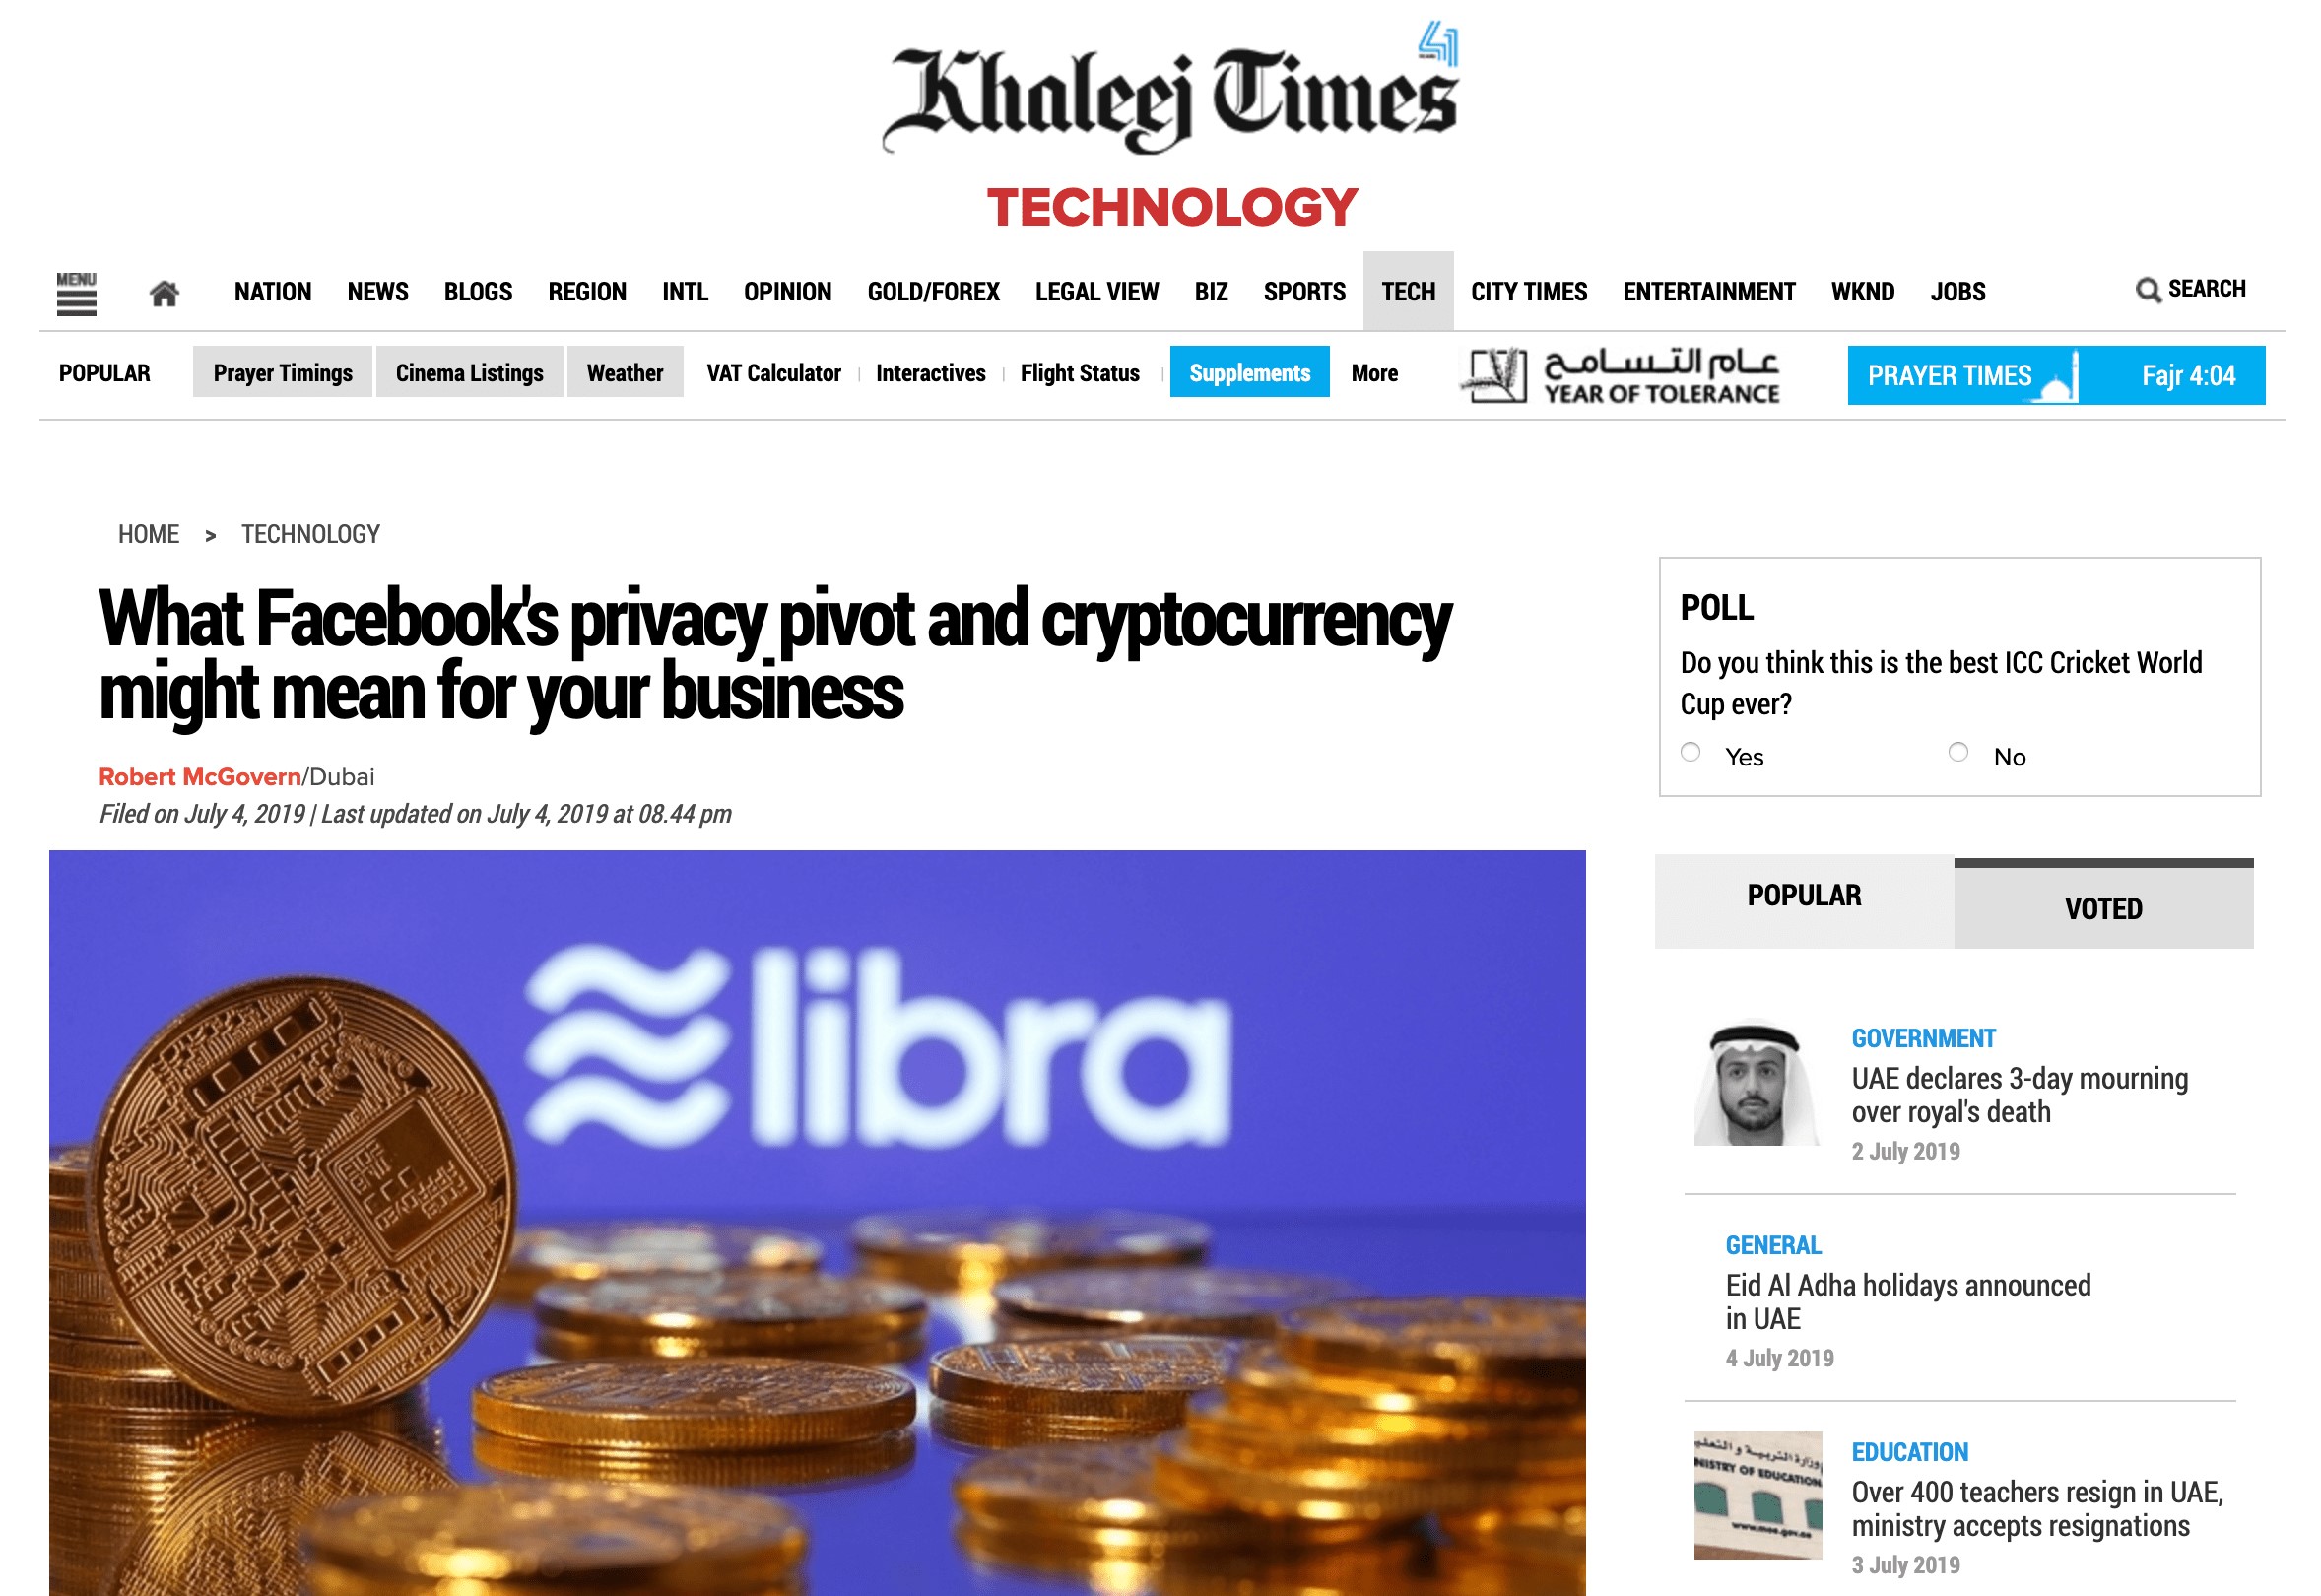 What Facebook’s Privacy Pivot & Cryptocurrency Might Mean For Your Business